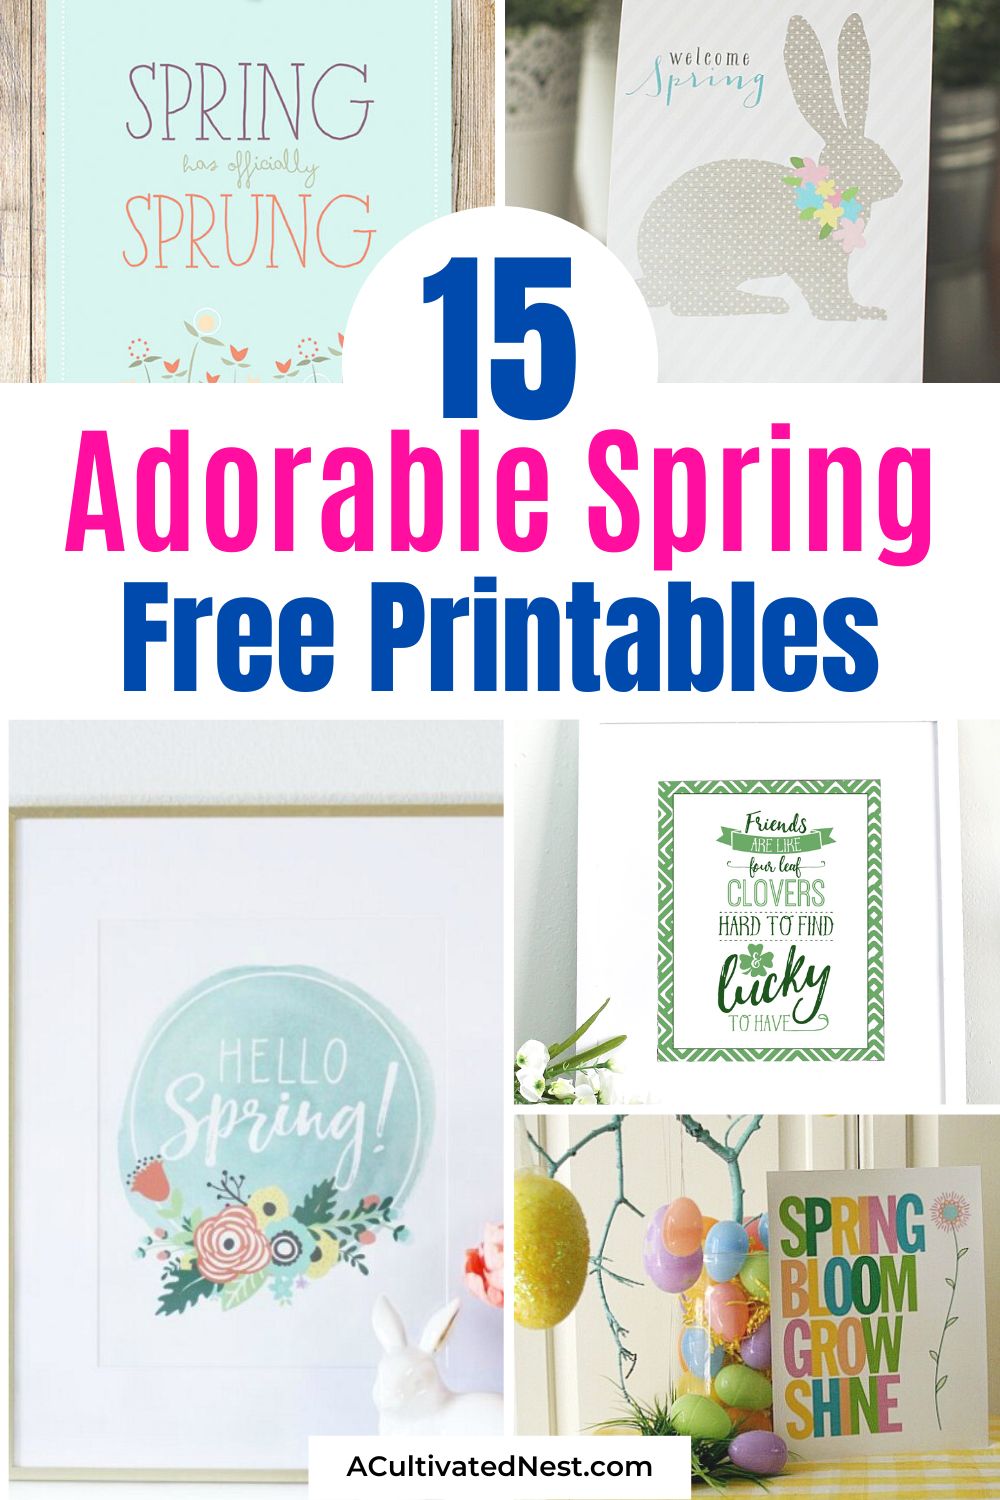 15 Cute Free Spring Printables- Get your home ready for spring on a budget with these beautiful free spring wall art printables! There are so many pretty designs to choose from! | spring wall art decor, Easter wall art, St. Patrick's Day wall art, Saint Patrick's Day decor, #freePrintable #spring #wallArt #decor #ACultivatedNest